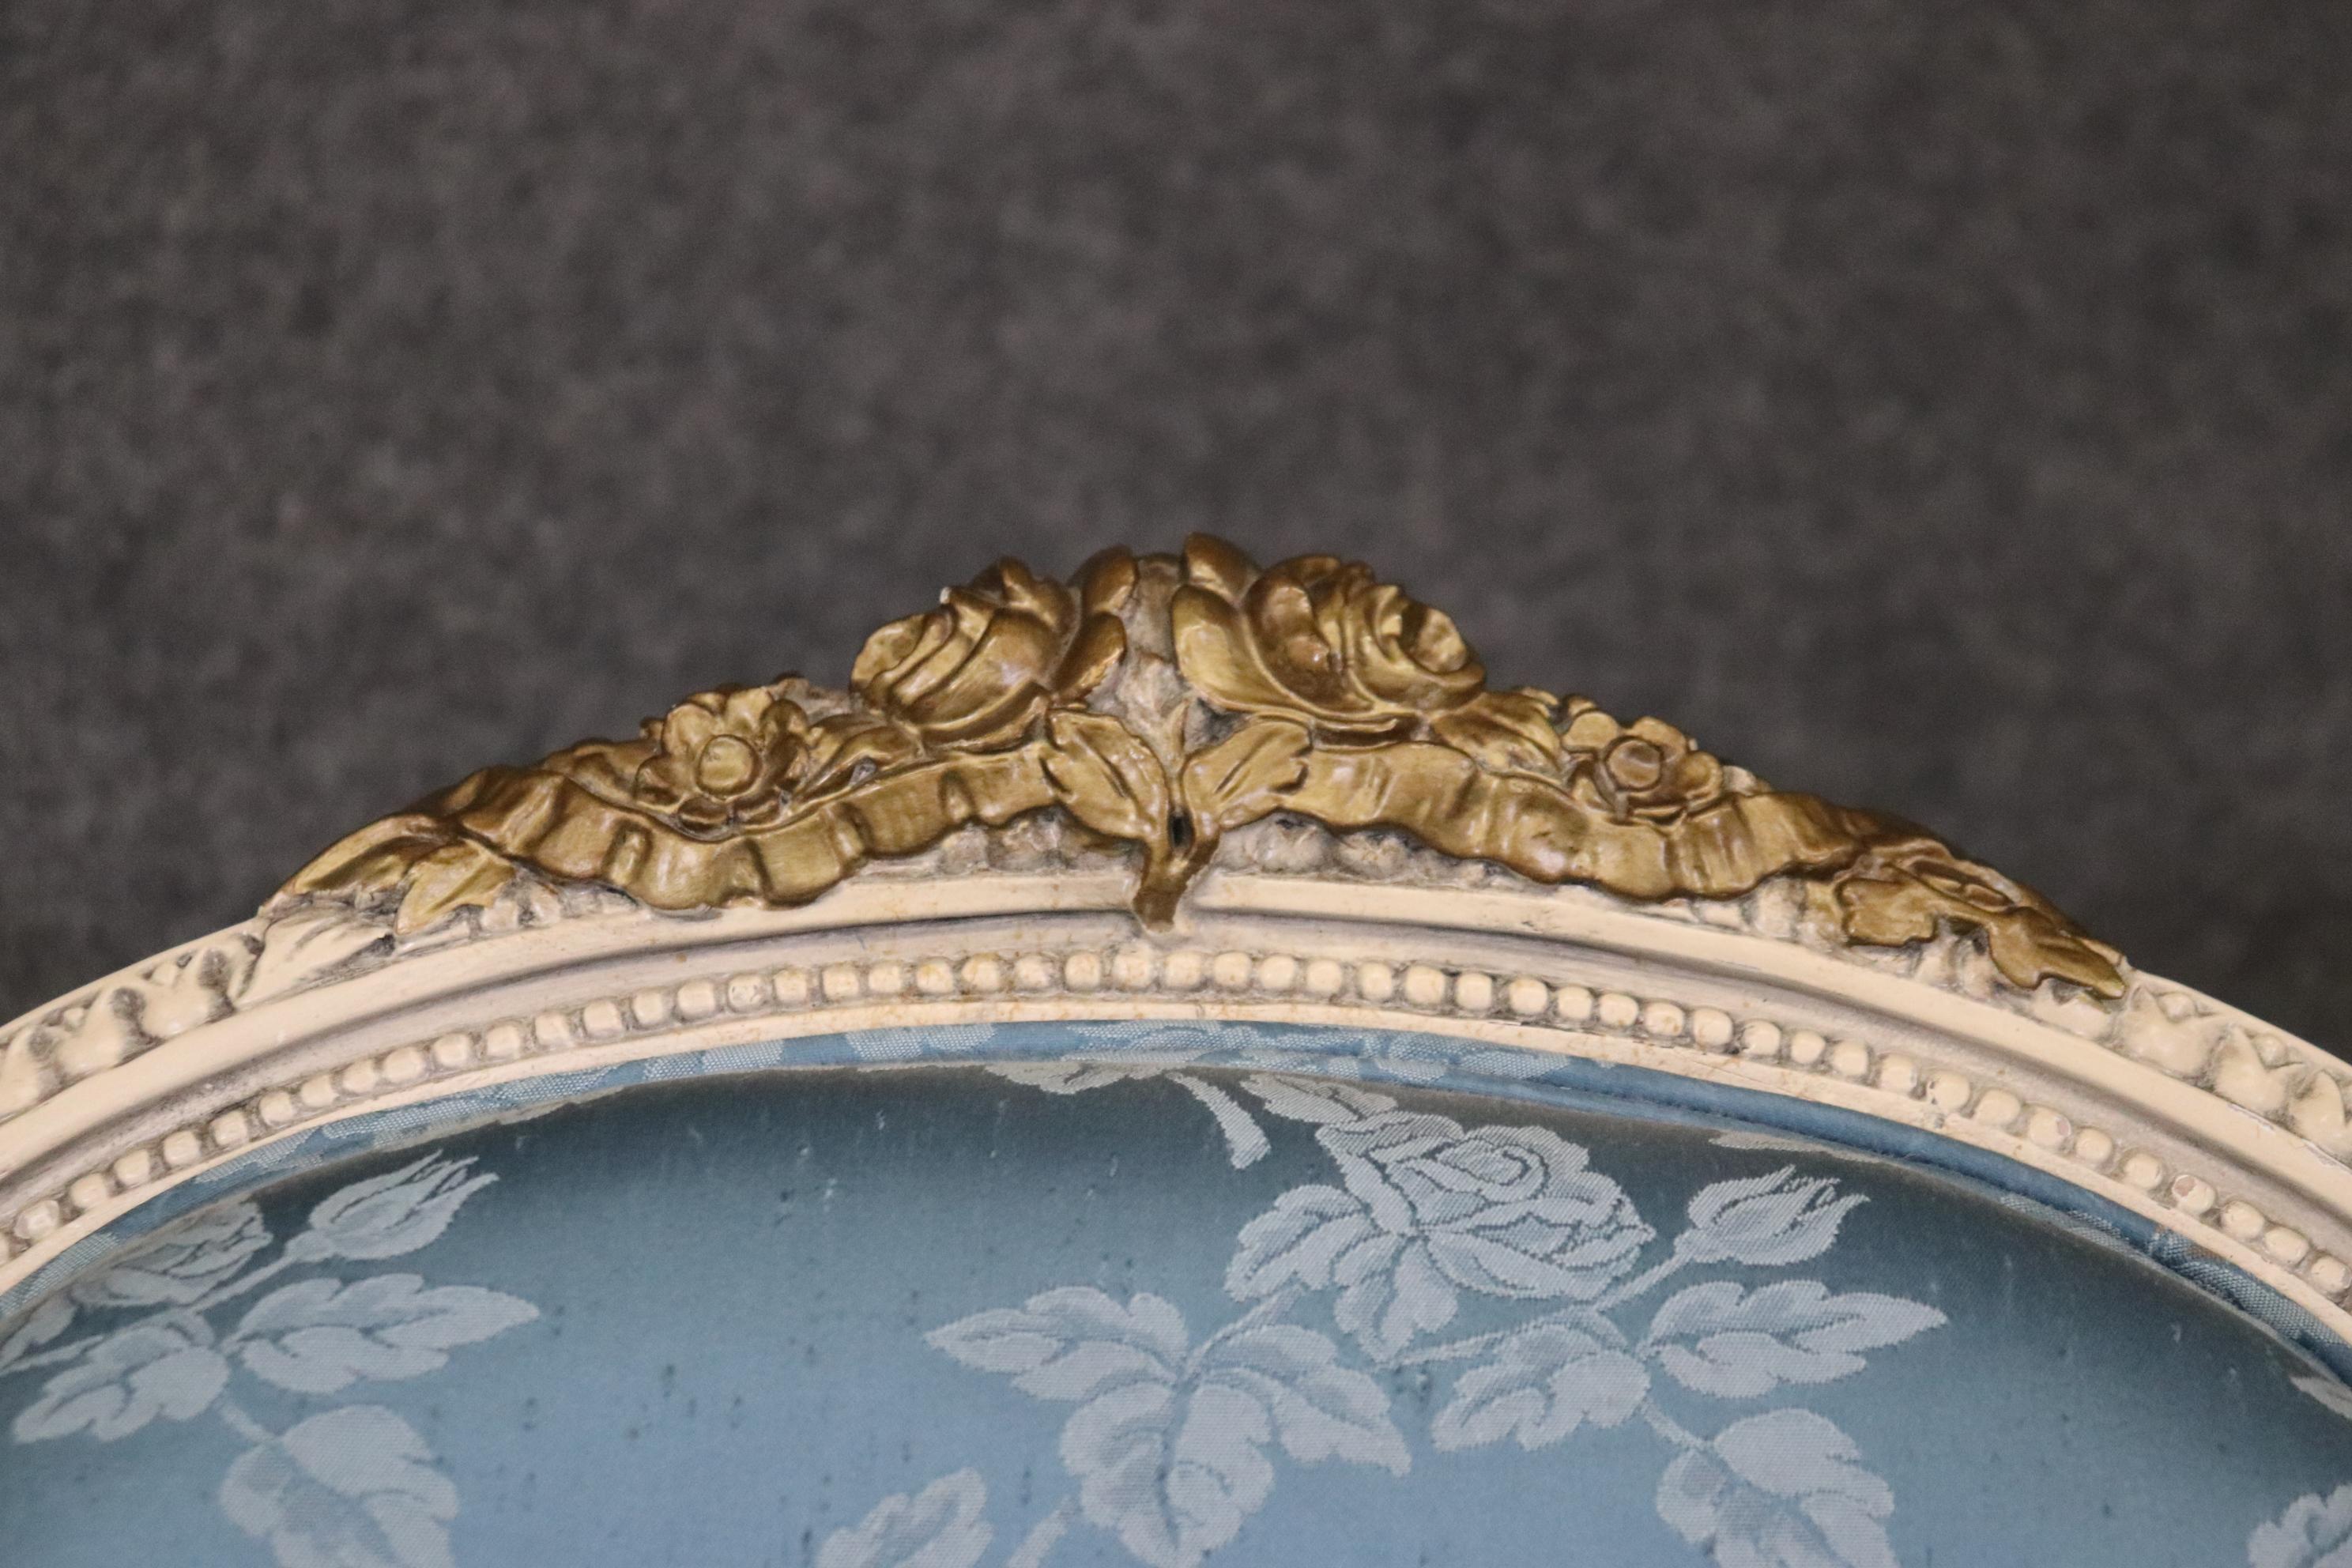 This is one of two pairs we have. They are in good condition and may have signs of wear and use including minor stains here or there but nothing significant or unusual for a pair of 70-80 year old chairs. The carving and painted and gilded finishes